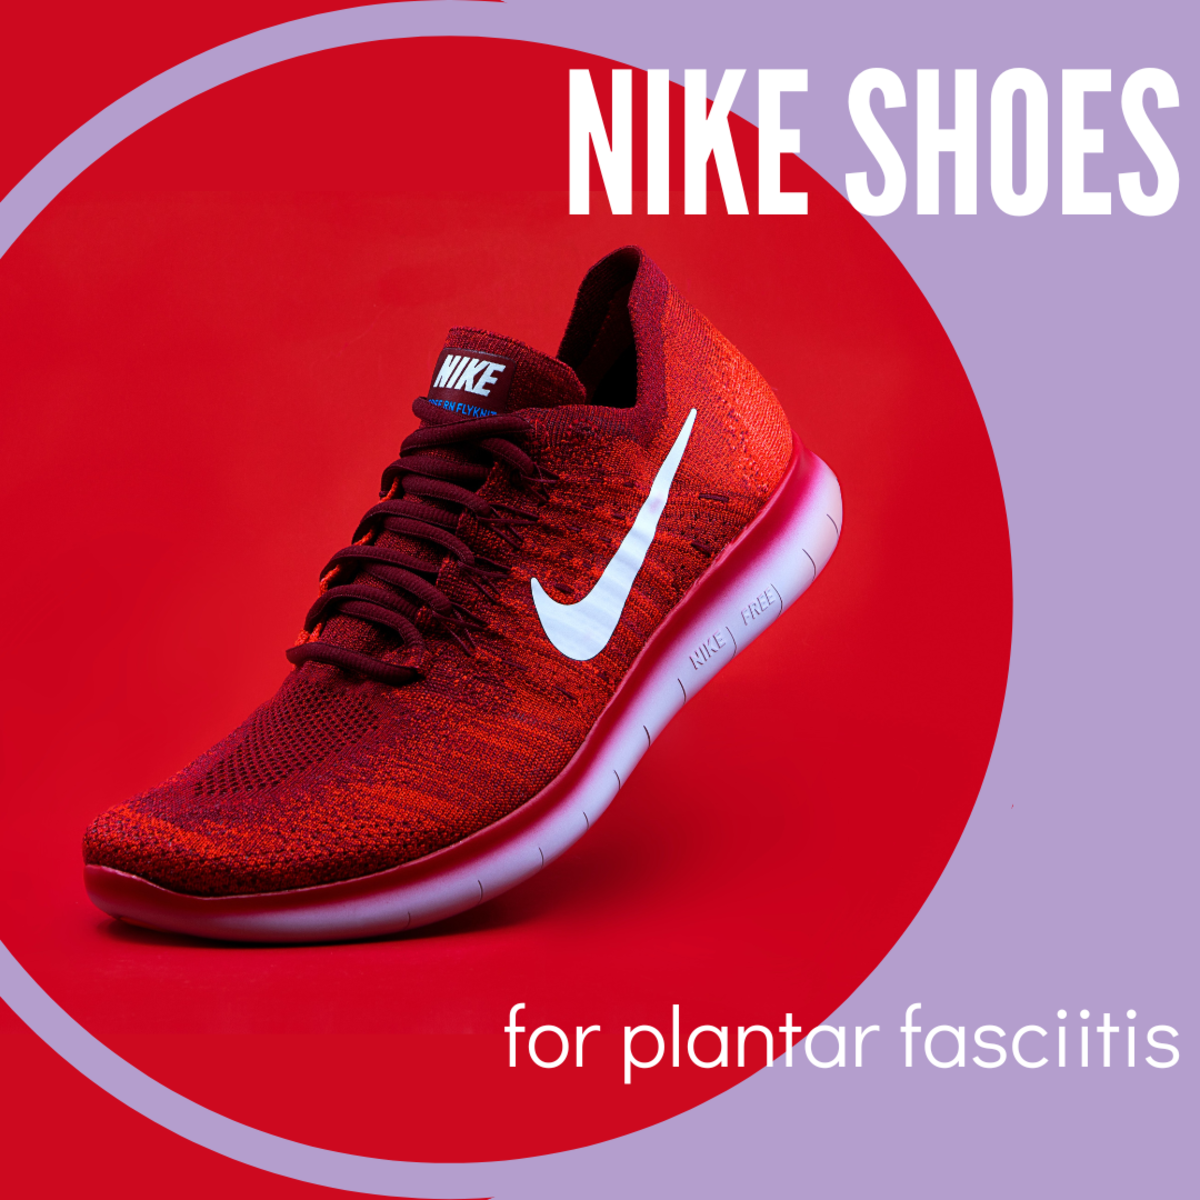 Best Shoes For Plantar Fasciitis For Nike